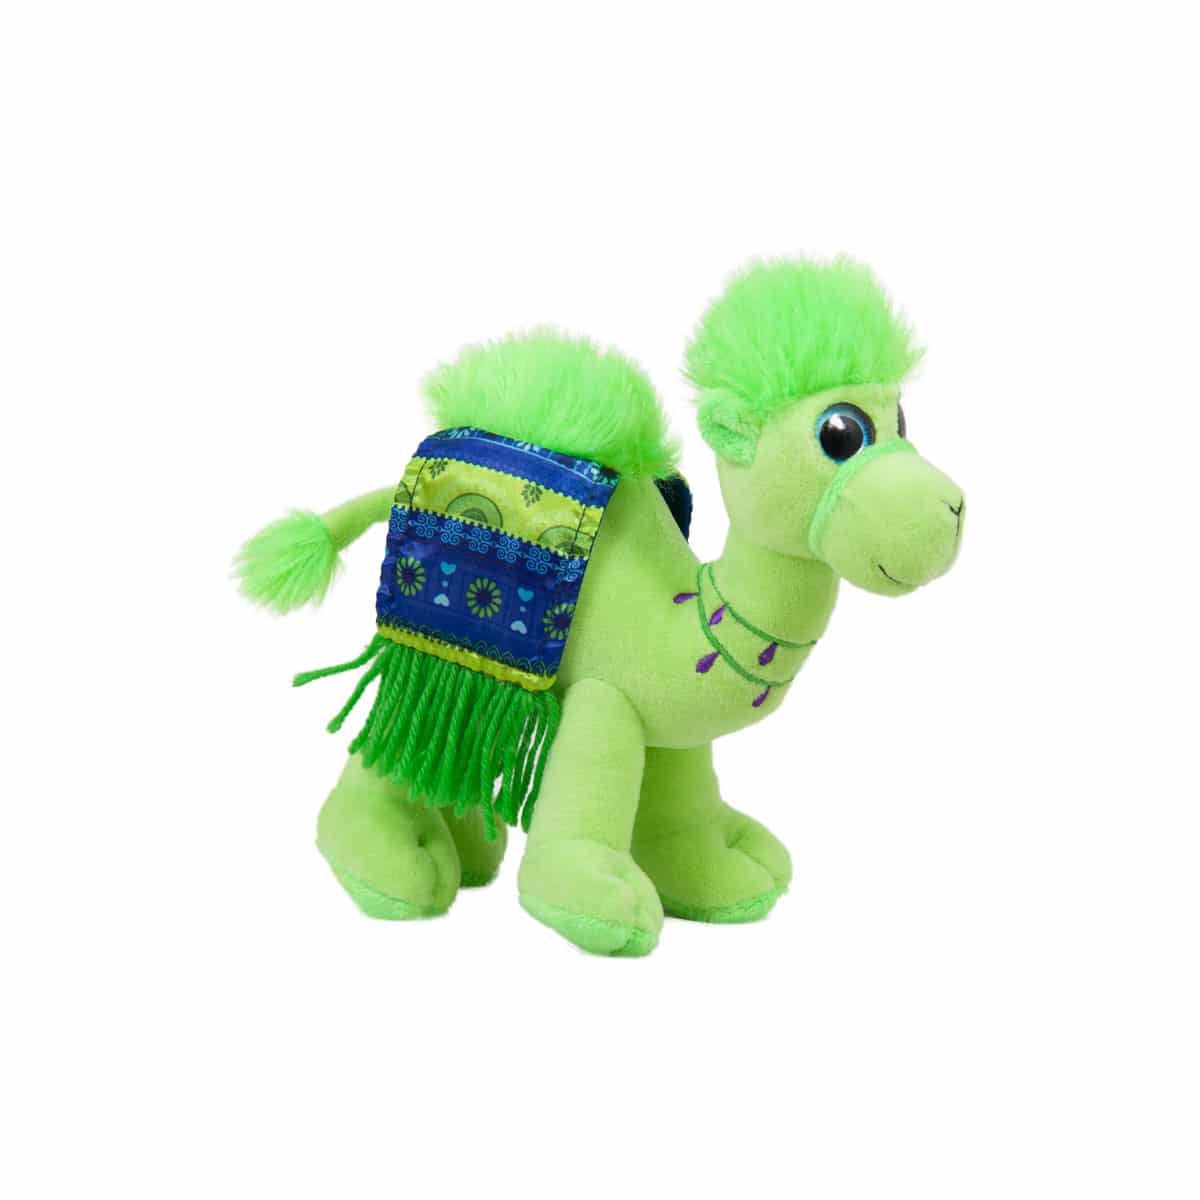 Camel with colorful saddle - Green